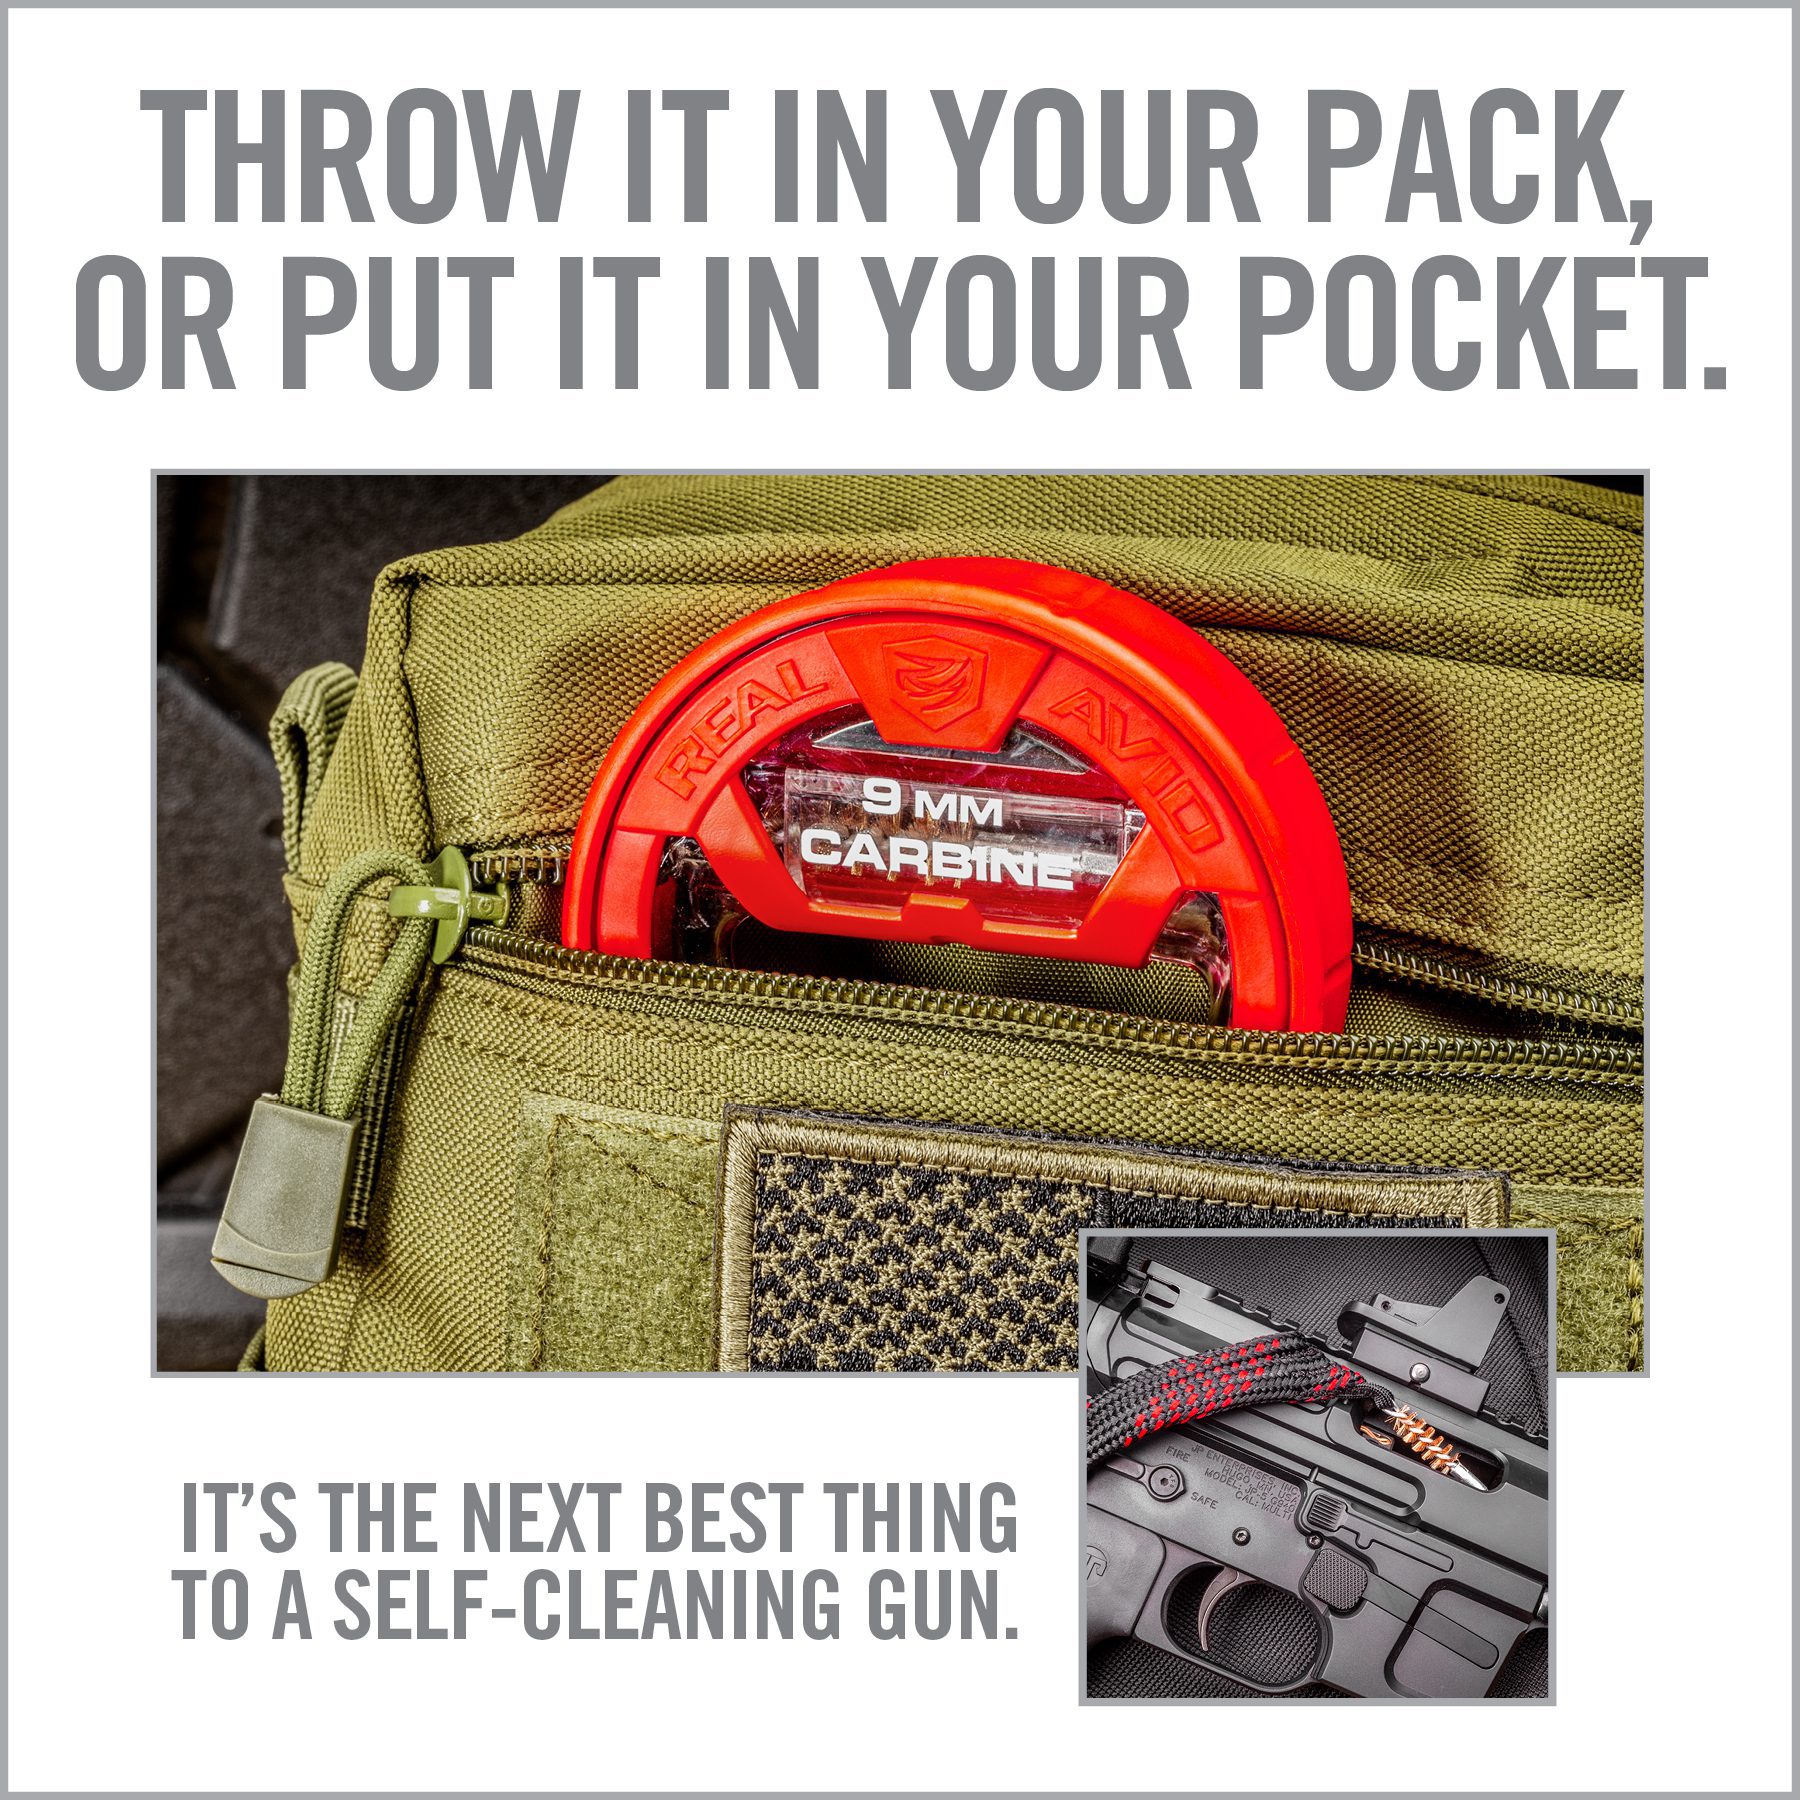 a magazine ad with an image of a gun in the pocket